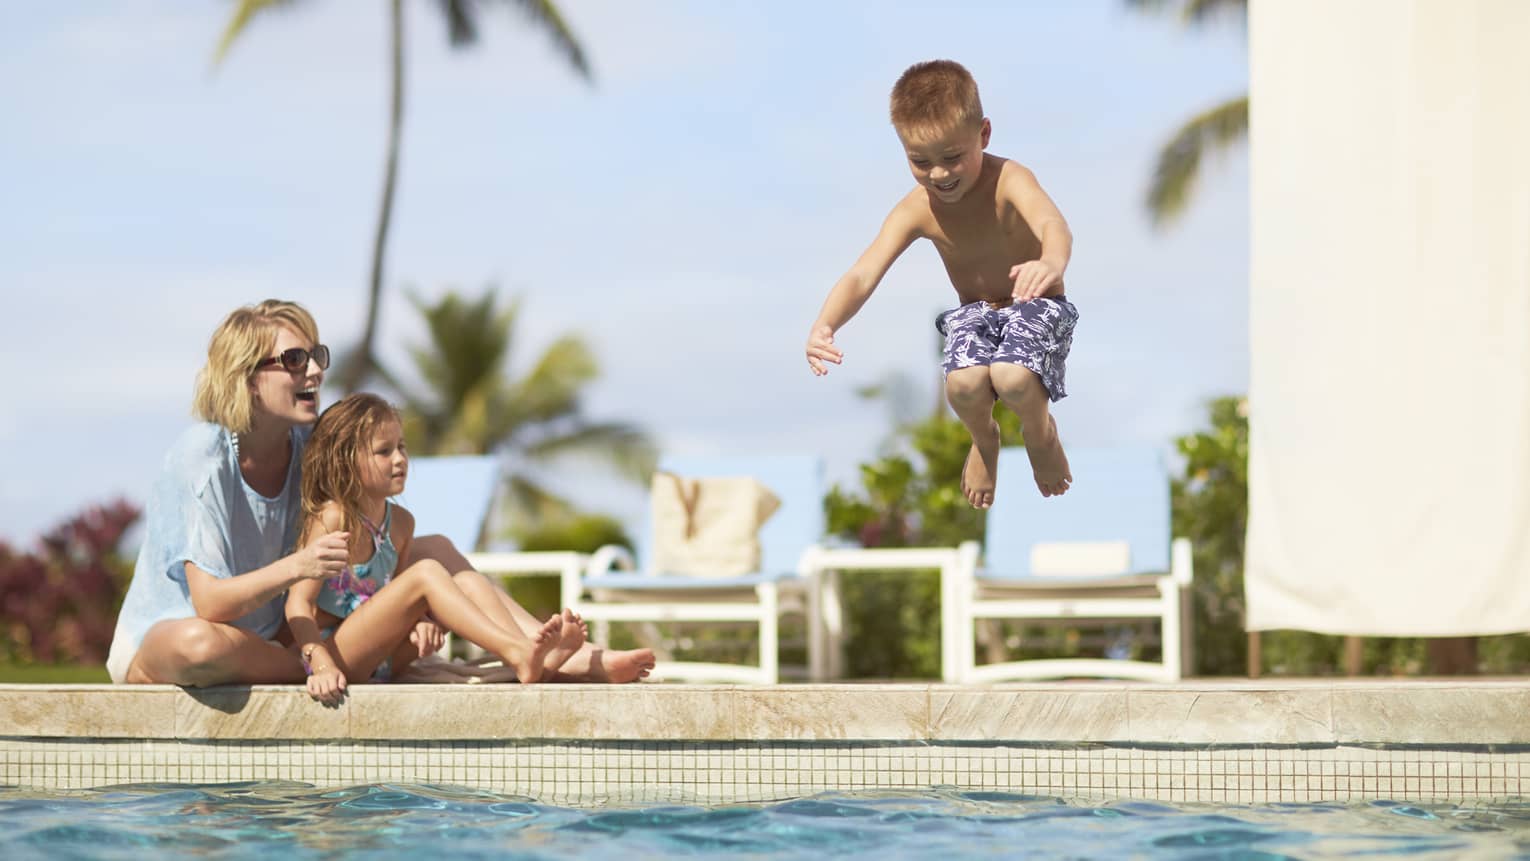 A small boy jumping into a pool next to his mom and little sister.